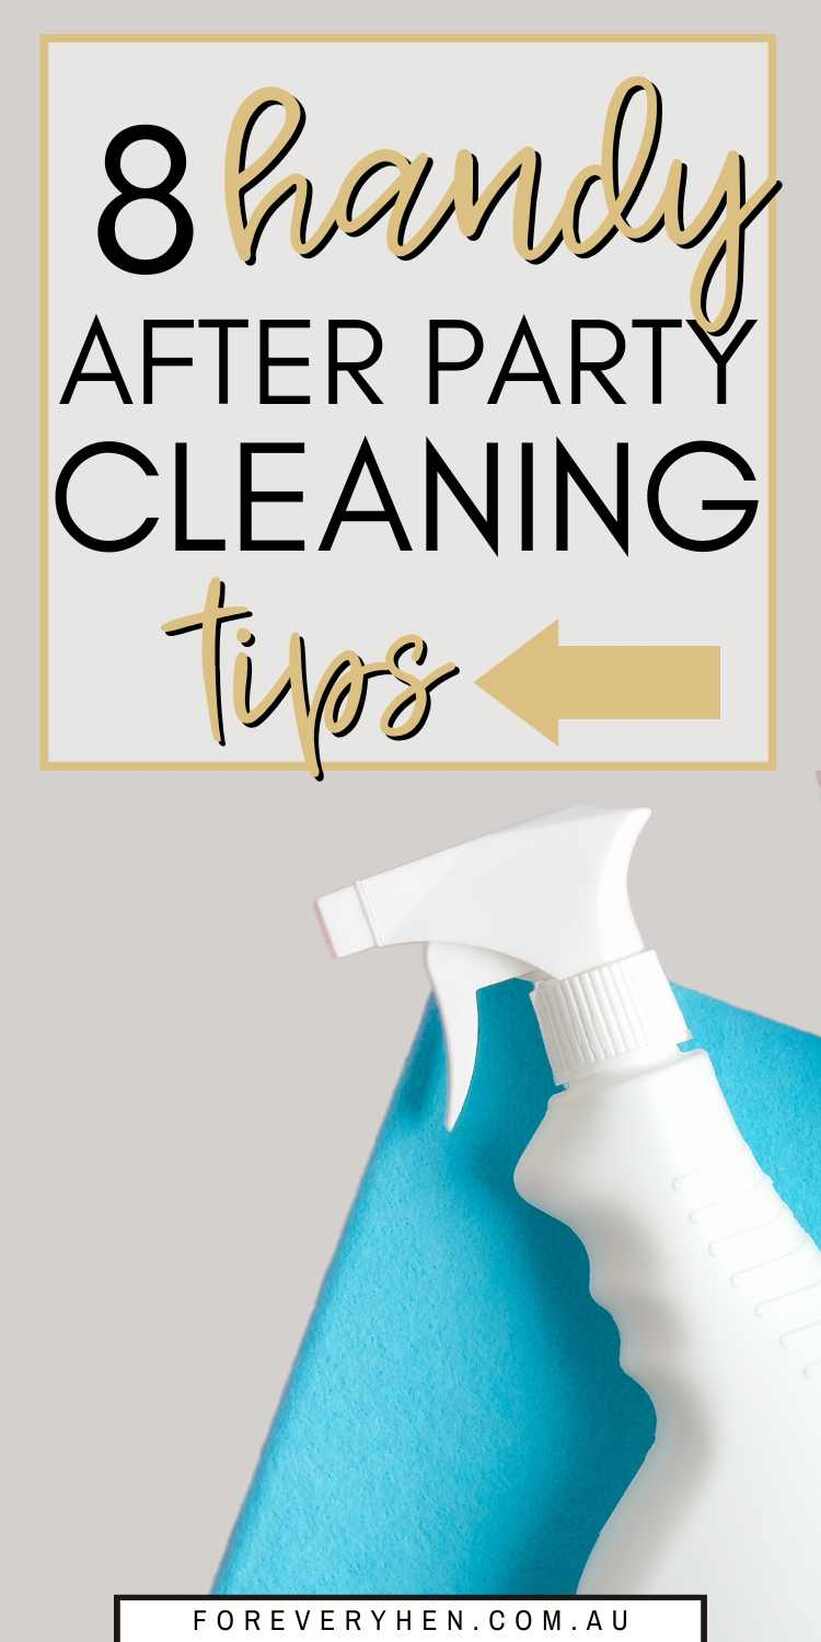 Image of cleaning tools. Text overlay: 8 handy after party cleaning tips